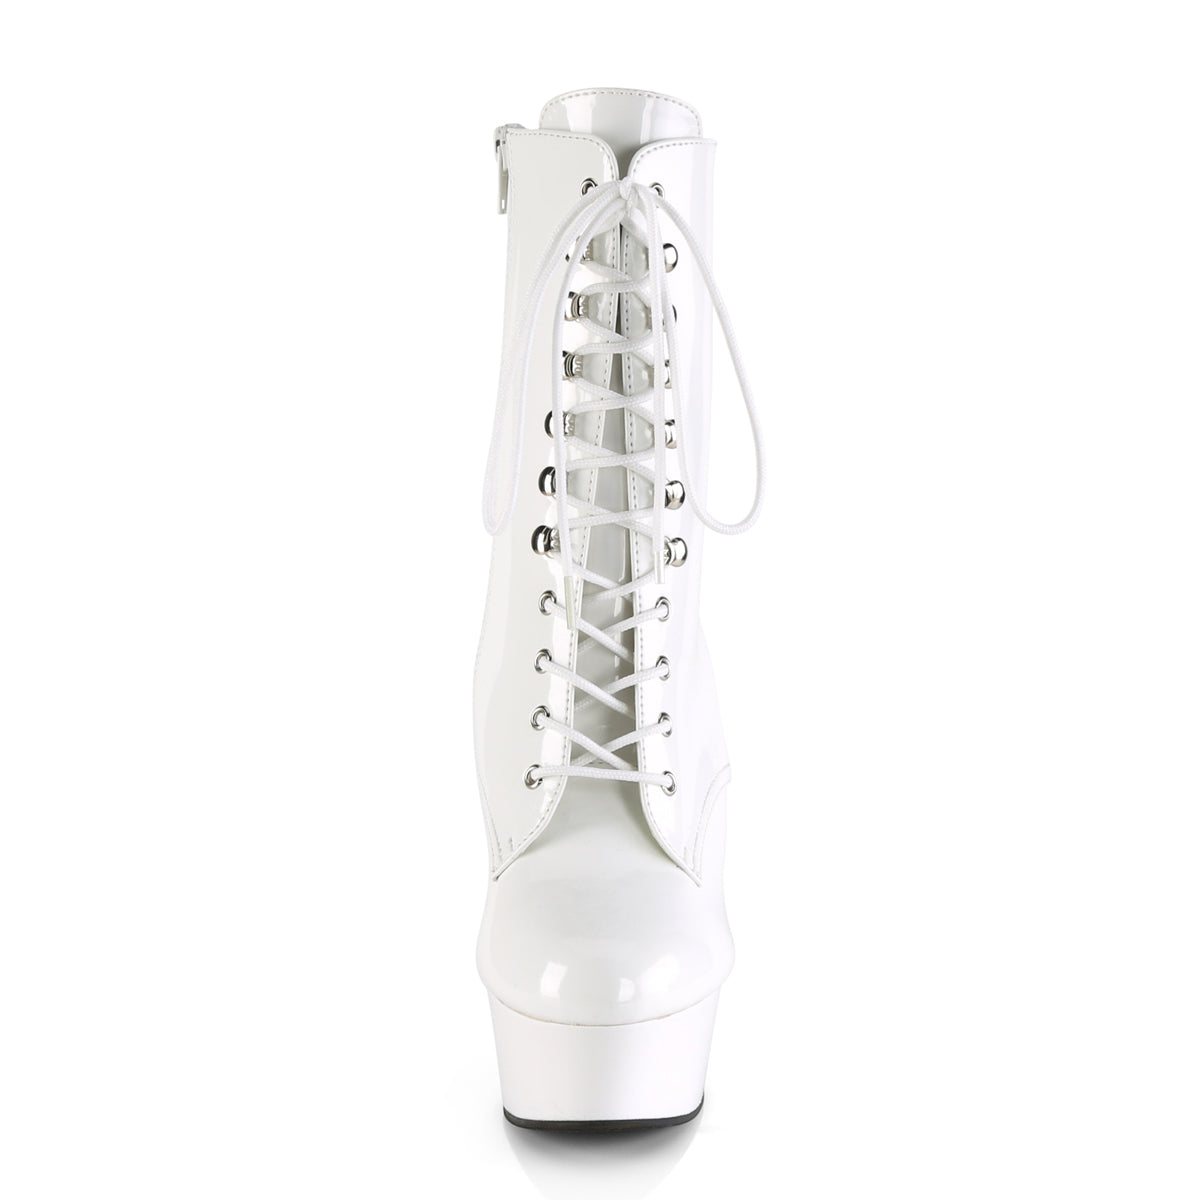 DELIGHT-1020 6 Inch Heel White Patent Pole Dancing Platforms-Pleaser- Sexy Shoes Alternative Footwear